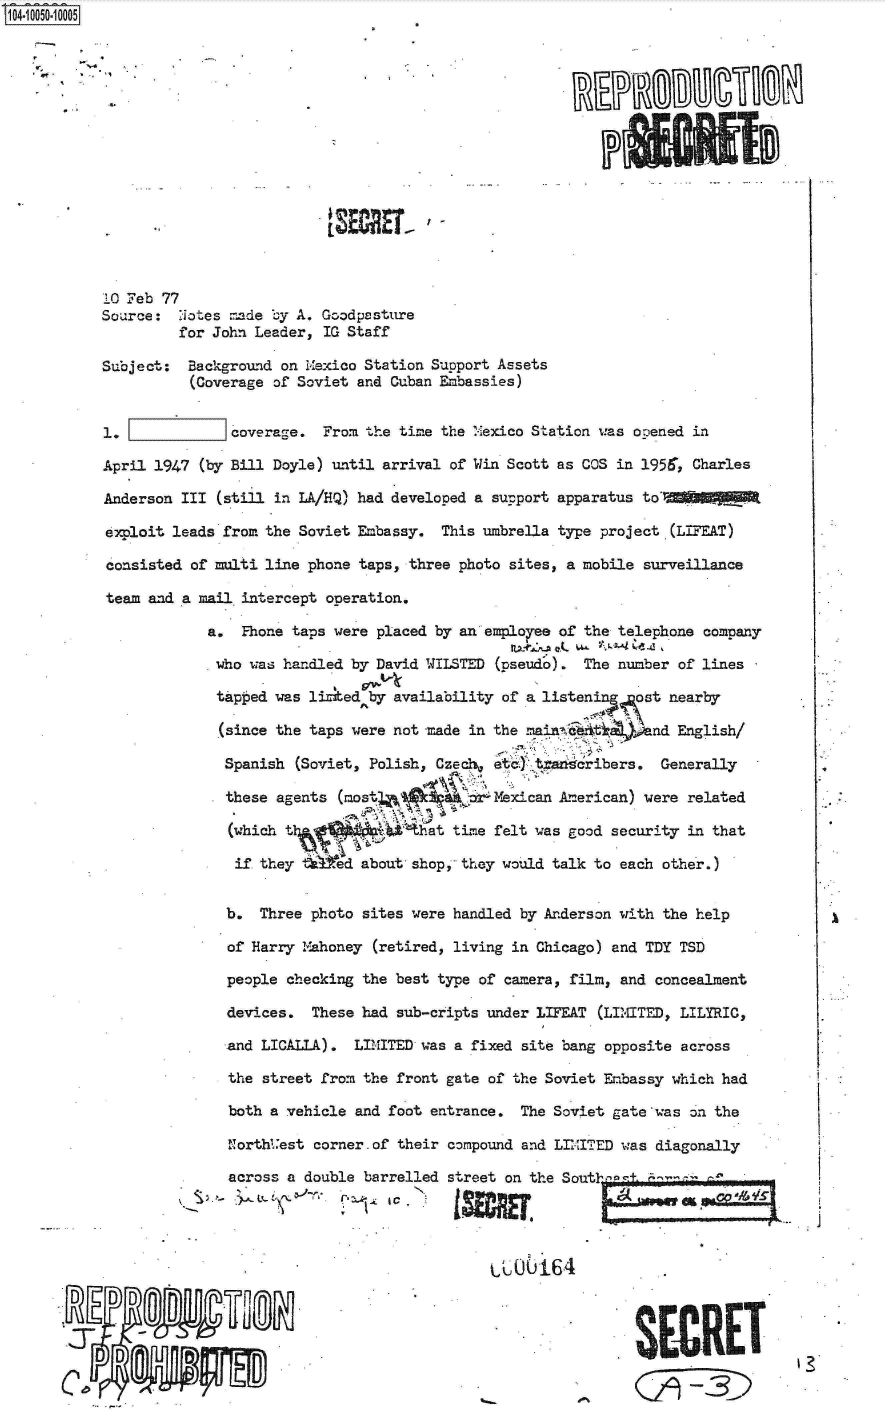 handle is hein.jfk/jfkarch07769 and id is 1 raw text is: 104-10050-10005
















           10 Feb 77
           Source:   .iotes made by A. Goodpasture
                     for John Leader, IG Staff

           Subject:   Background on Mexico Station Support Assets
                      (Coverage of Soviet and Cuban Embassies)


           1.              coverage.  From the time the Mexico Station was opened in

           April  1947 (by Bill Doyle) until arrival of Win Scott as COS in 1956,, Charles

           Anderson  III (still in LA/HQ) had developed a support apparatus to'

           exploit  leads from the Soviet Embassy.  This umbrella type project (L:DEAT)

           consisted  of multi line phone taps, three photo sites, a mobile surveillance

           team  and a mail intercept operation.

                        a.  Phone taps were placed by an employee of the telephone company

                        who  was handled by David WILSTED (pseudo).  The number of lines

                        tapped  was lised  by availability of a listening  ost nearby

                        (since  the taps were not made in the  ain  a        nd English/

                          Spanish (Soviet, Polish, Czechs ete)   aeribers. Generally

                          these agents  (most             Mexican American) were  related

                          (which             b .that time felt was good security in that

                          if  they ted about shop, they would talk to each other.)


                          b.  Three photo  sites were handled by Anderson with the help

                          of Harry Mahoney  (retired, living in Chicago) and TDY TSD

                          people checking  the best type of camera, film, and concealment

                          devices.  These  had sub-cripts under LIFEAT (LIMITED, LILYRIC,

                          and LICALLA).   LIMITED was a fixed site bang opposite across

                          the  street from the front gate of the Soviet Embassy which had

                          both a vehicle  and foot entrance.  The Soviet gate was on the

                          Northi.'est corner.of their compound and LIITED was diagonally

                          across  a double barrelled street on the Sout  Fn

                                                             0-164







                           D  D                      ~SEC. RET


